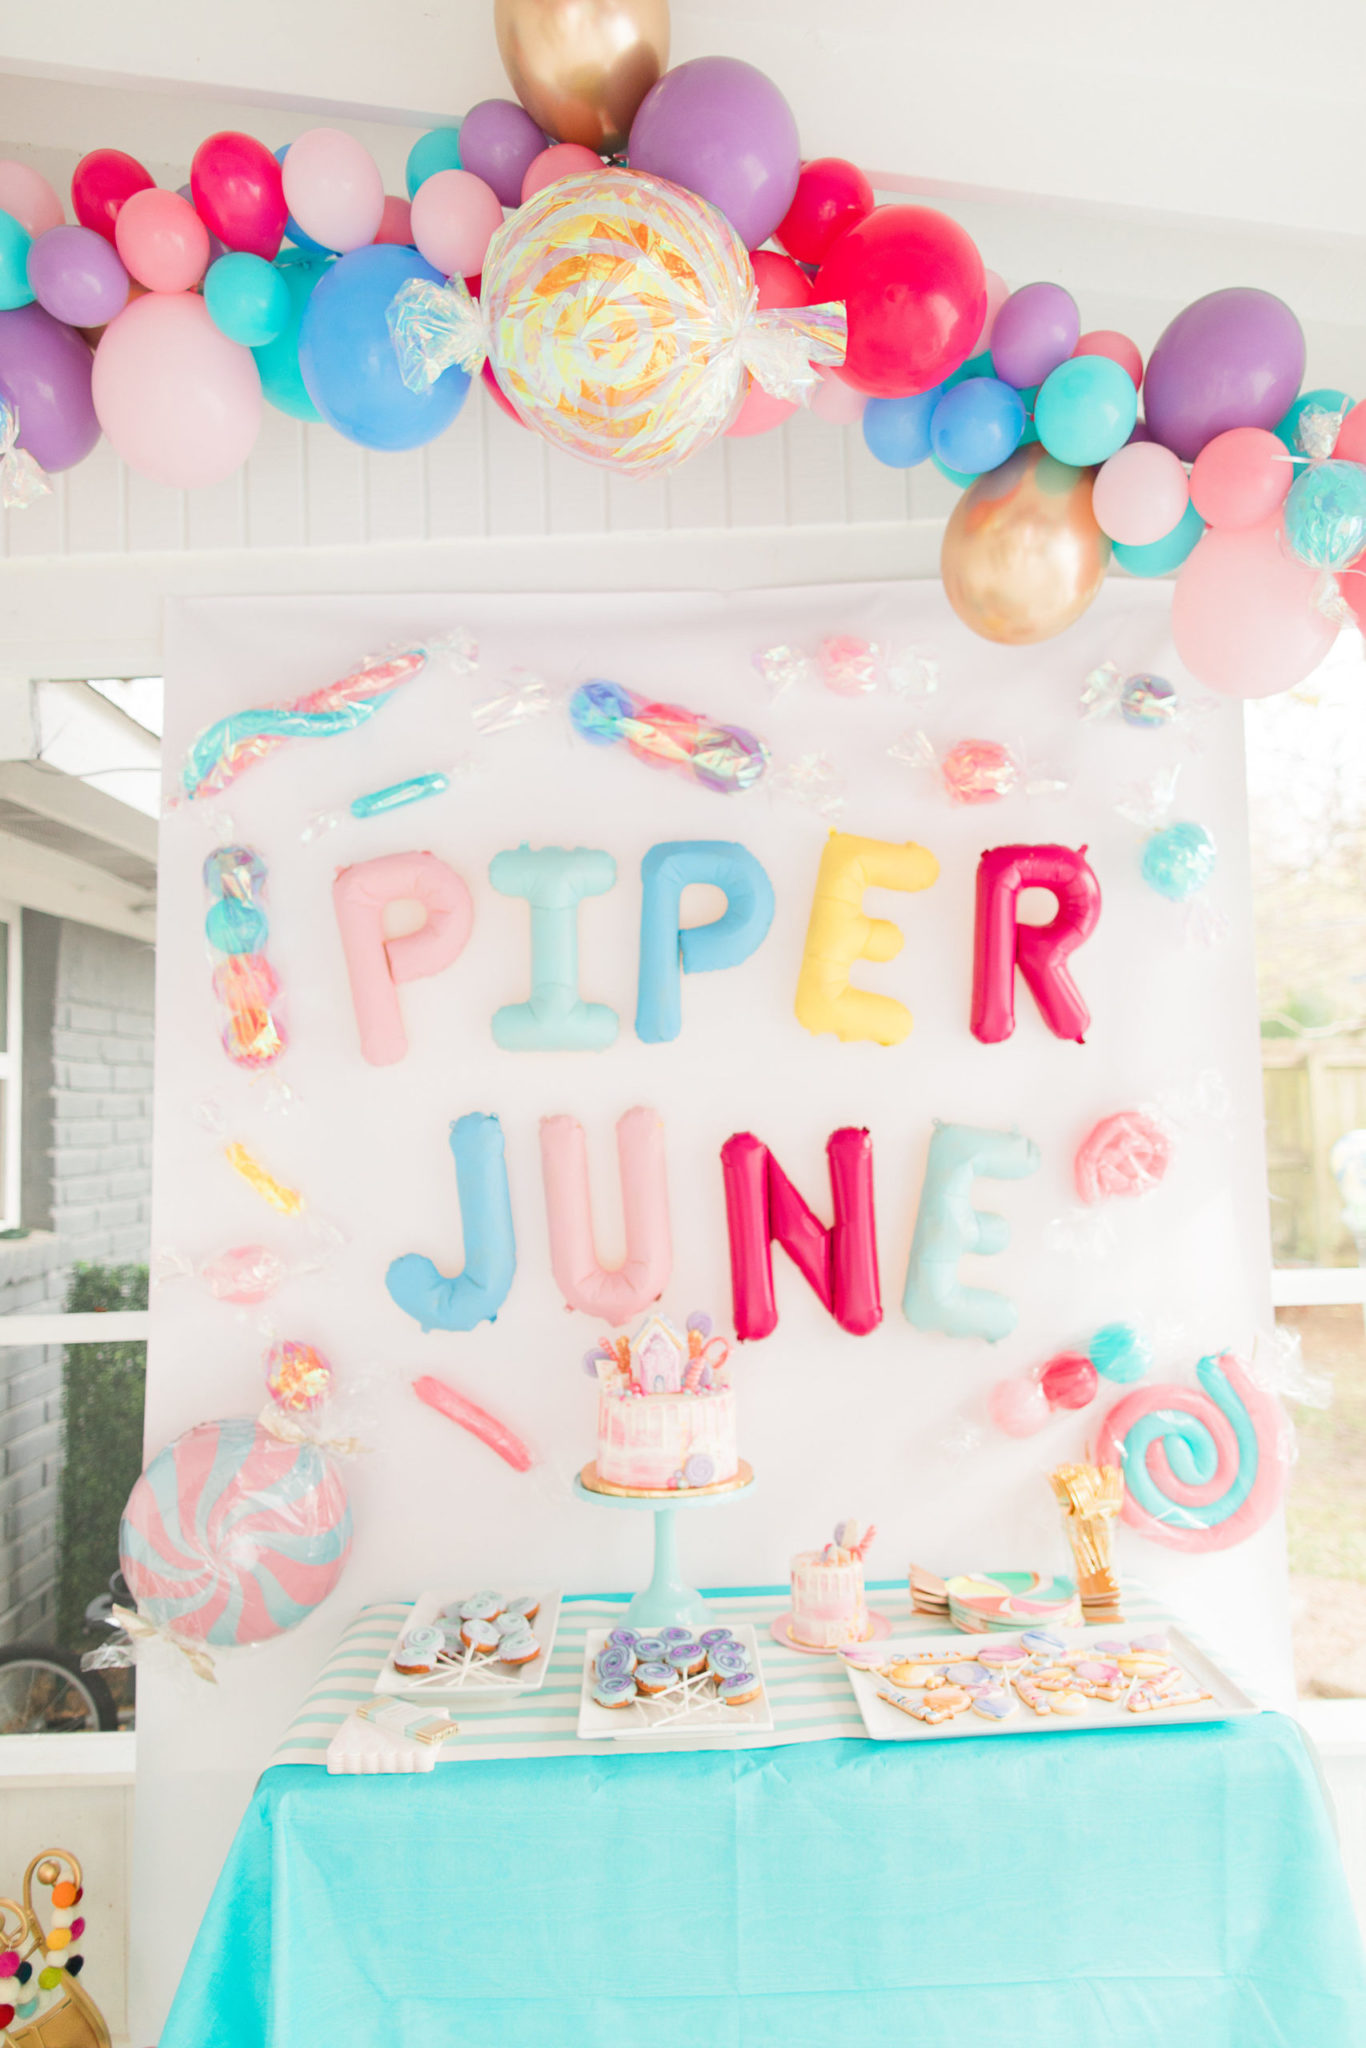 7 Sweet Letter and Number Cake Ideas to Personalize Your Party